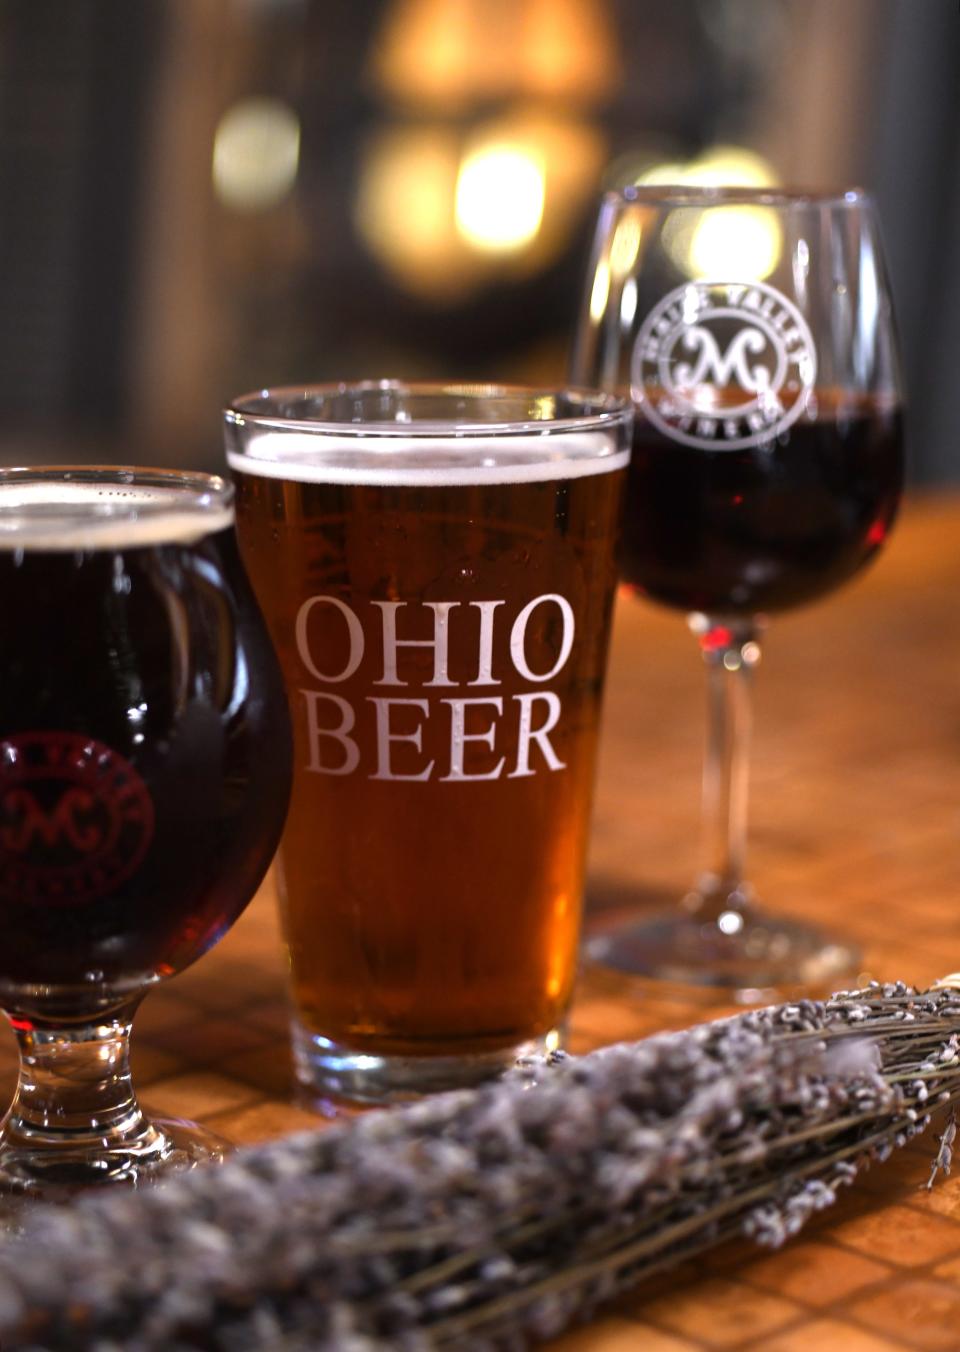 Maize Valley Brewery is among the statewide participants in the 2022 Ohio Pint Day.